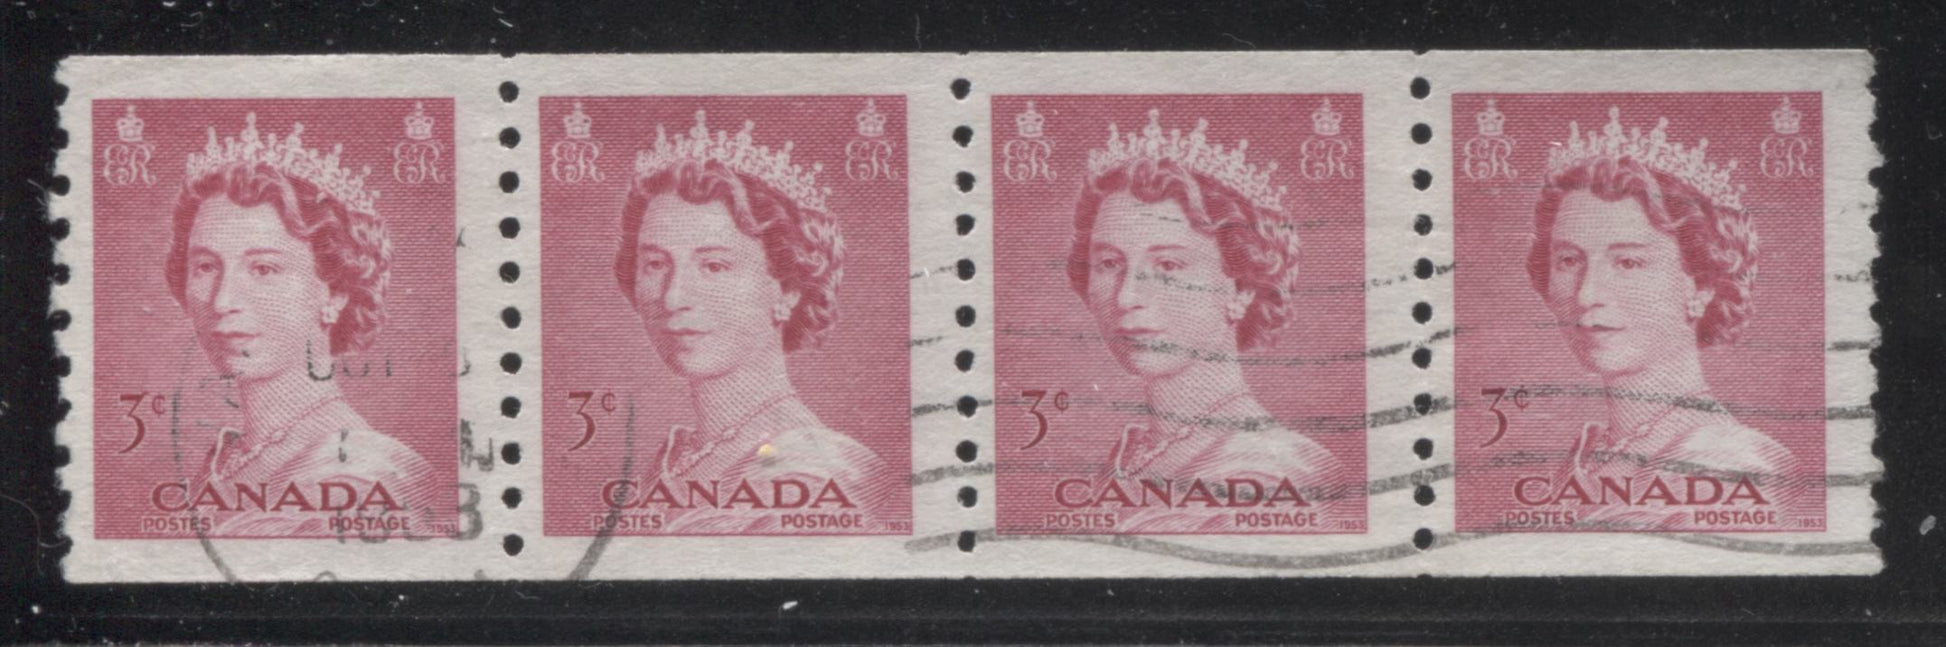 Canada #332 3c Cerise Queen Elizabeth II, 1953-1954 Karsh Issue, A Fine Used Coil Strip of 4 on Smooth Paper Brixton Chrome 